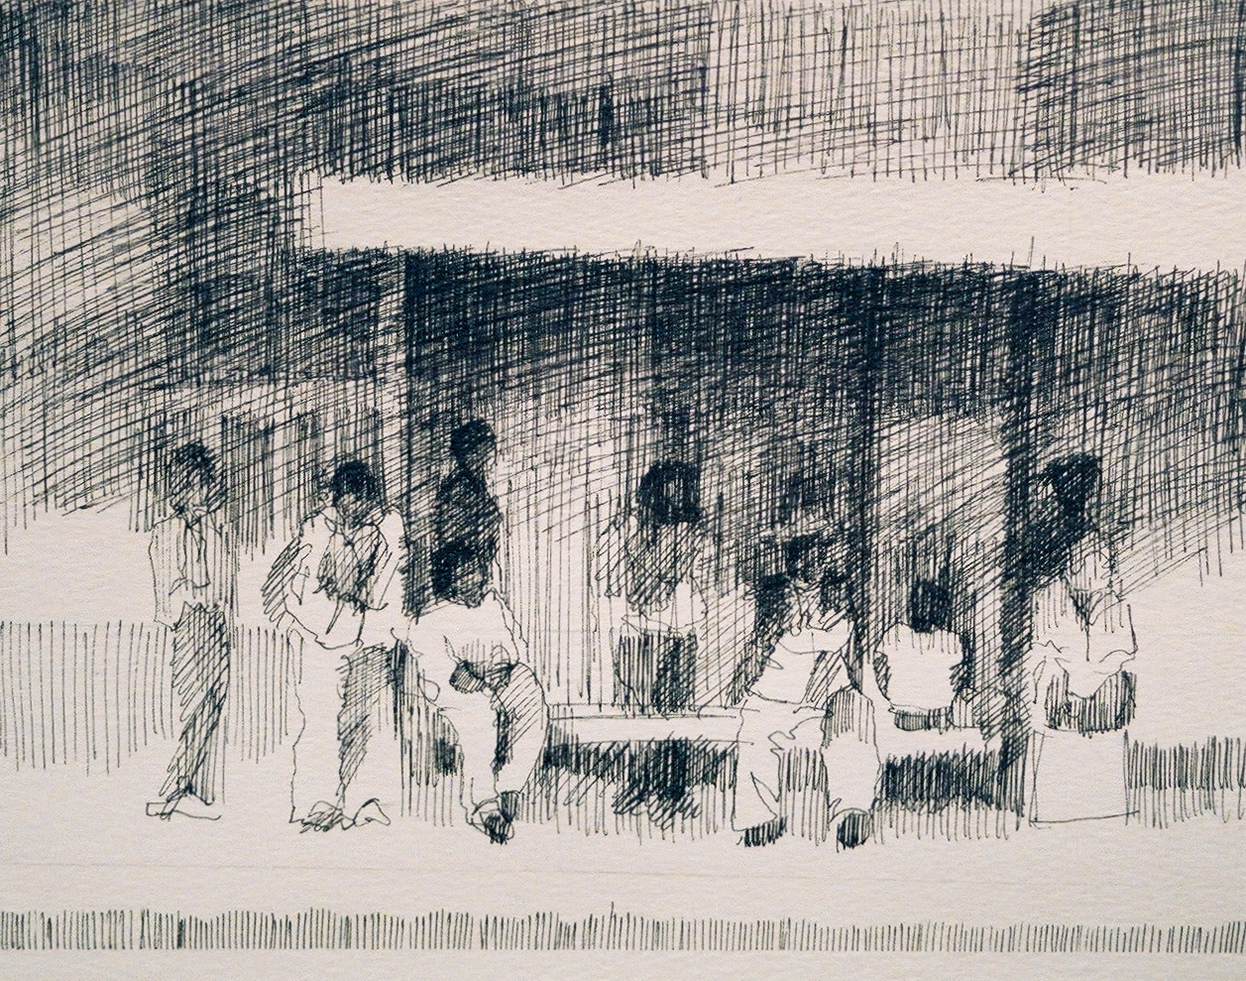 10th Street Stop, ink on paper, 2004